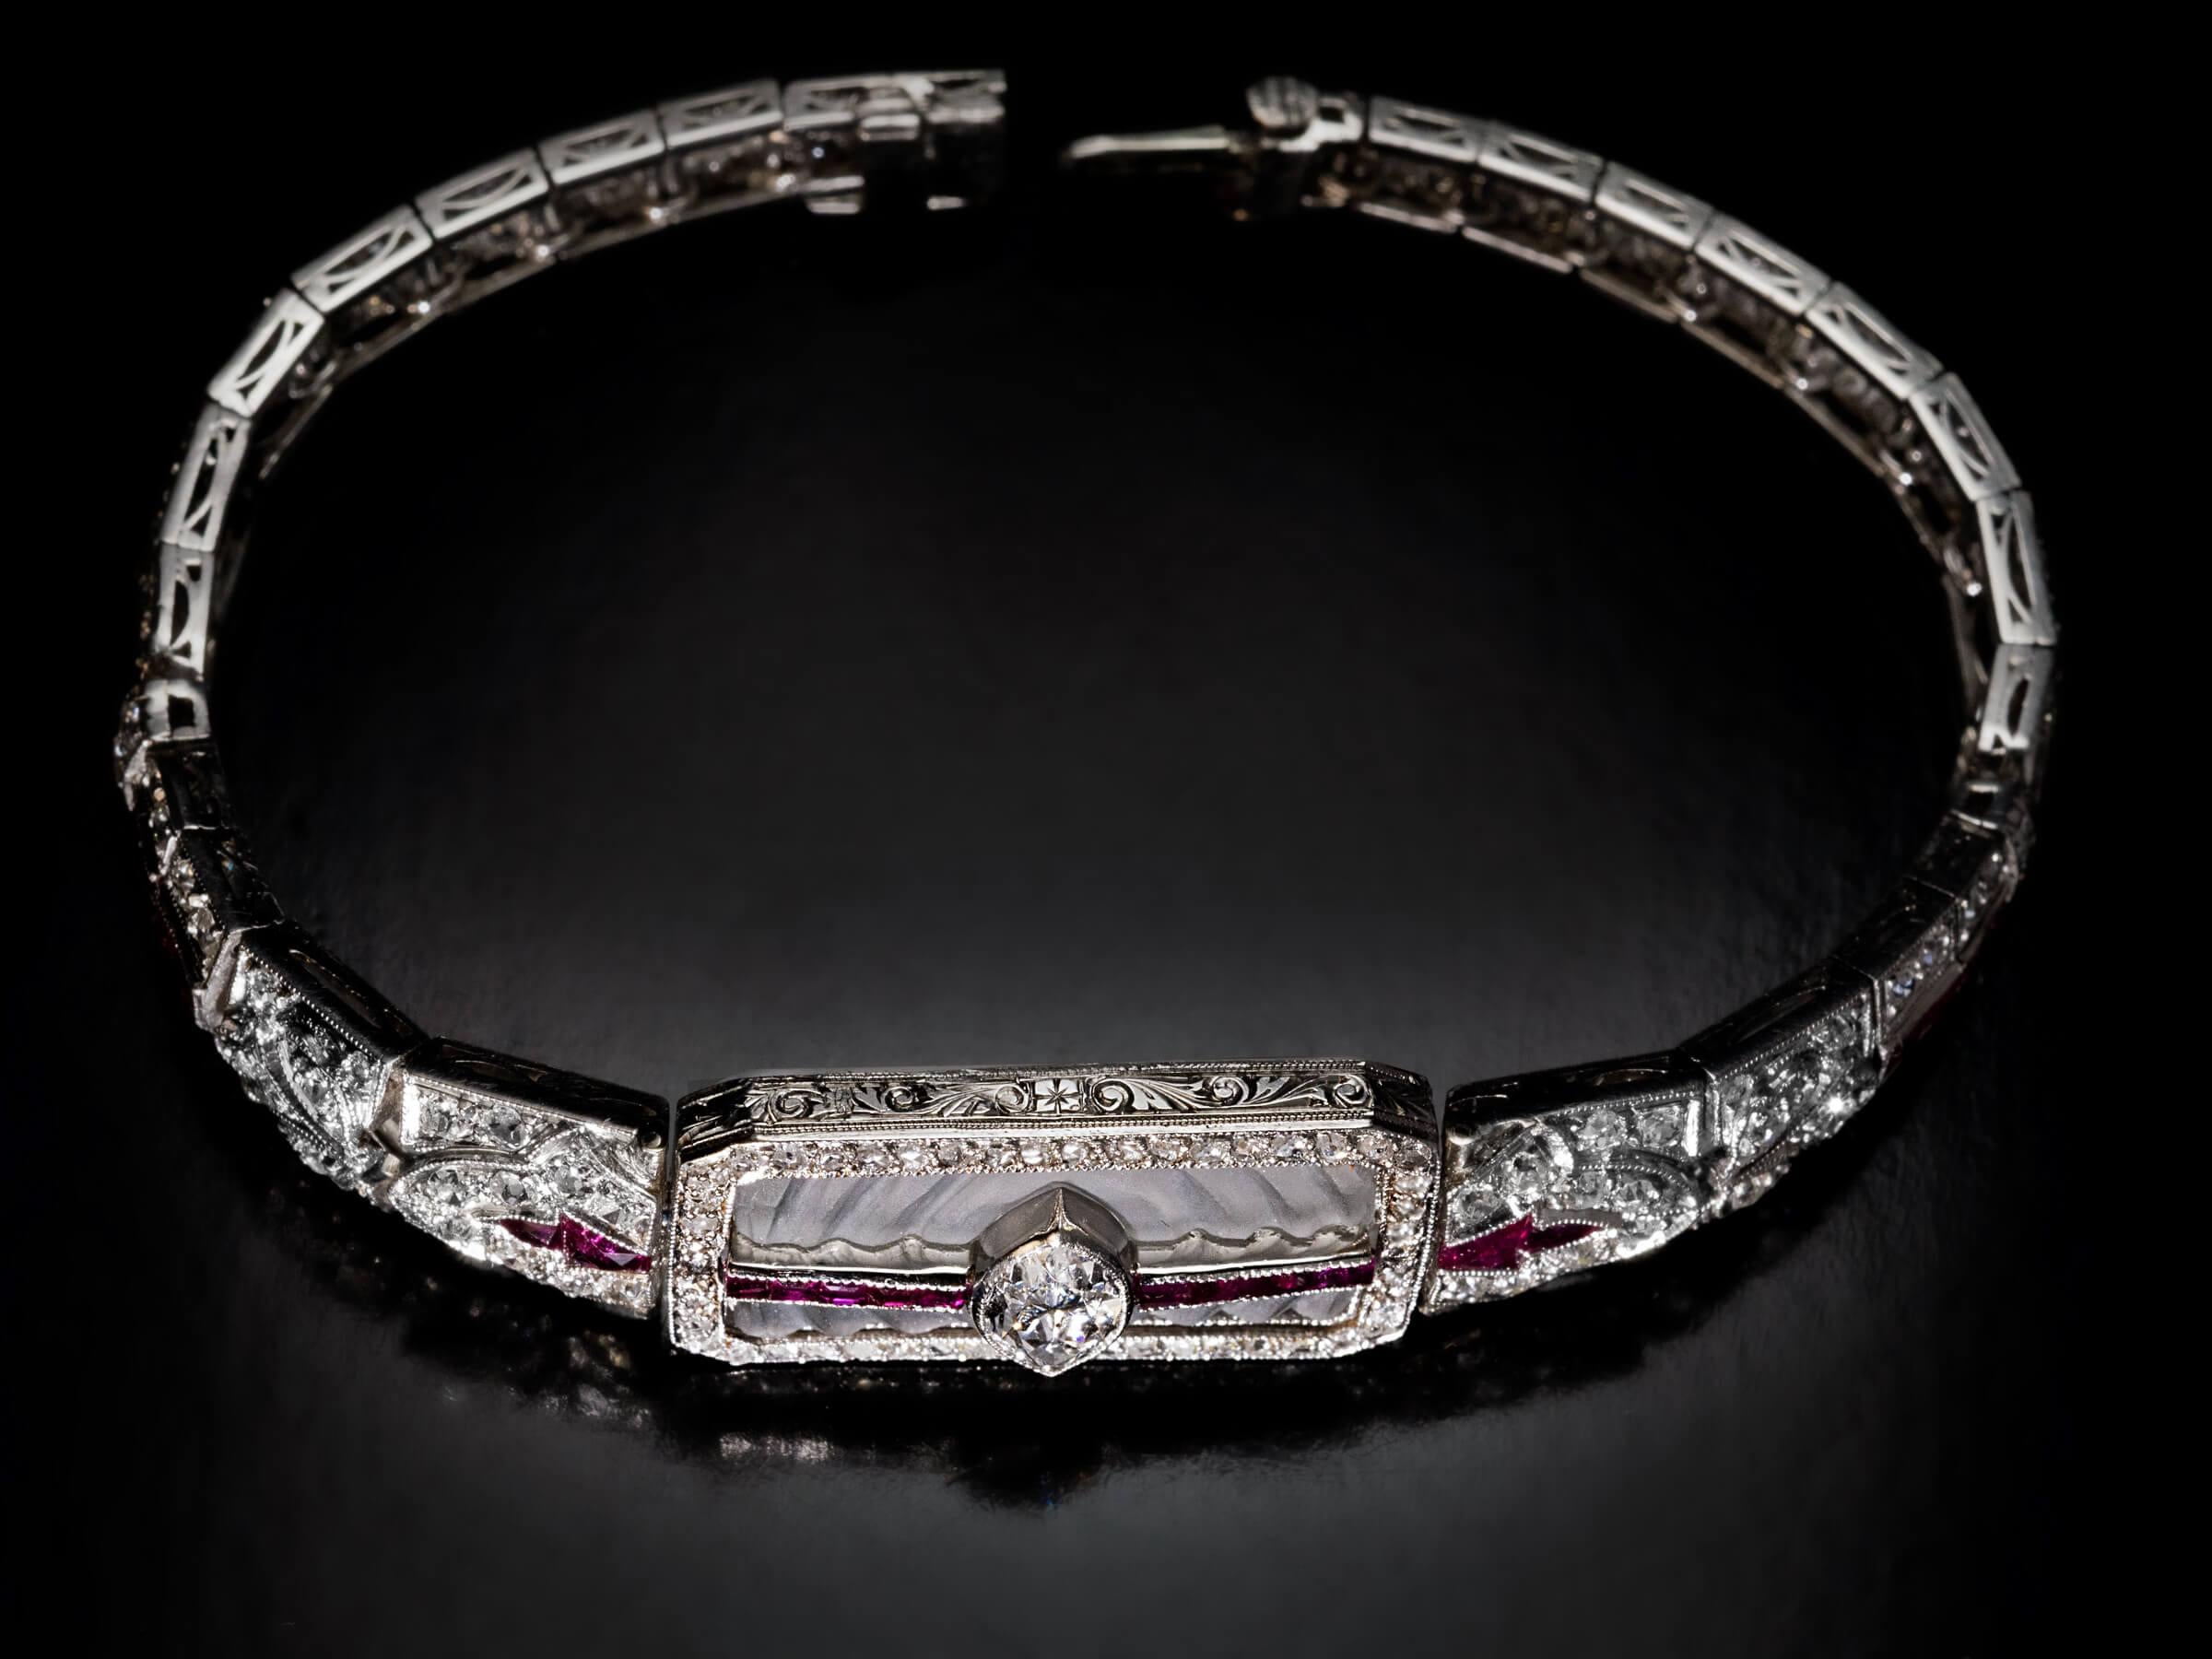 Circa 1910s  This antique early Art Deco era bracelet is finely handcrafted in platinum. The bracelet is centered with a frosted rock crystal plaque carved to imitate ripples in water. A bright white and clean marquise cut diamond (E color, VS1